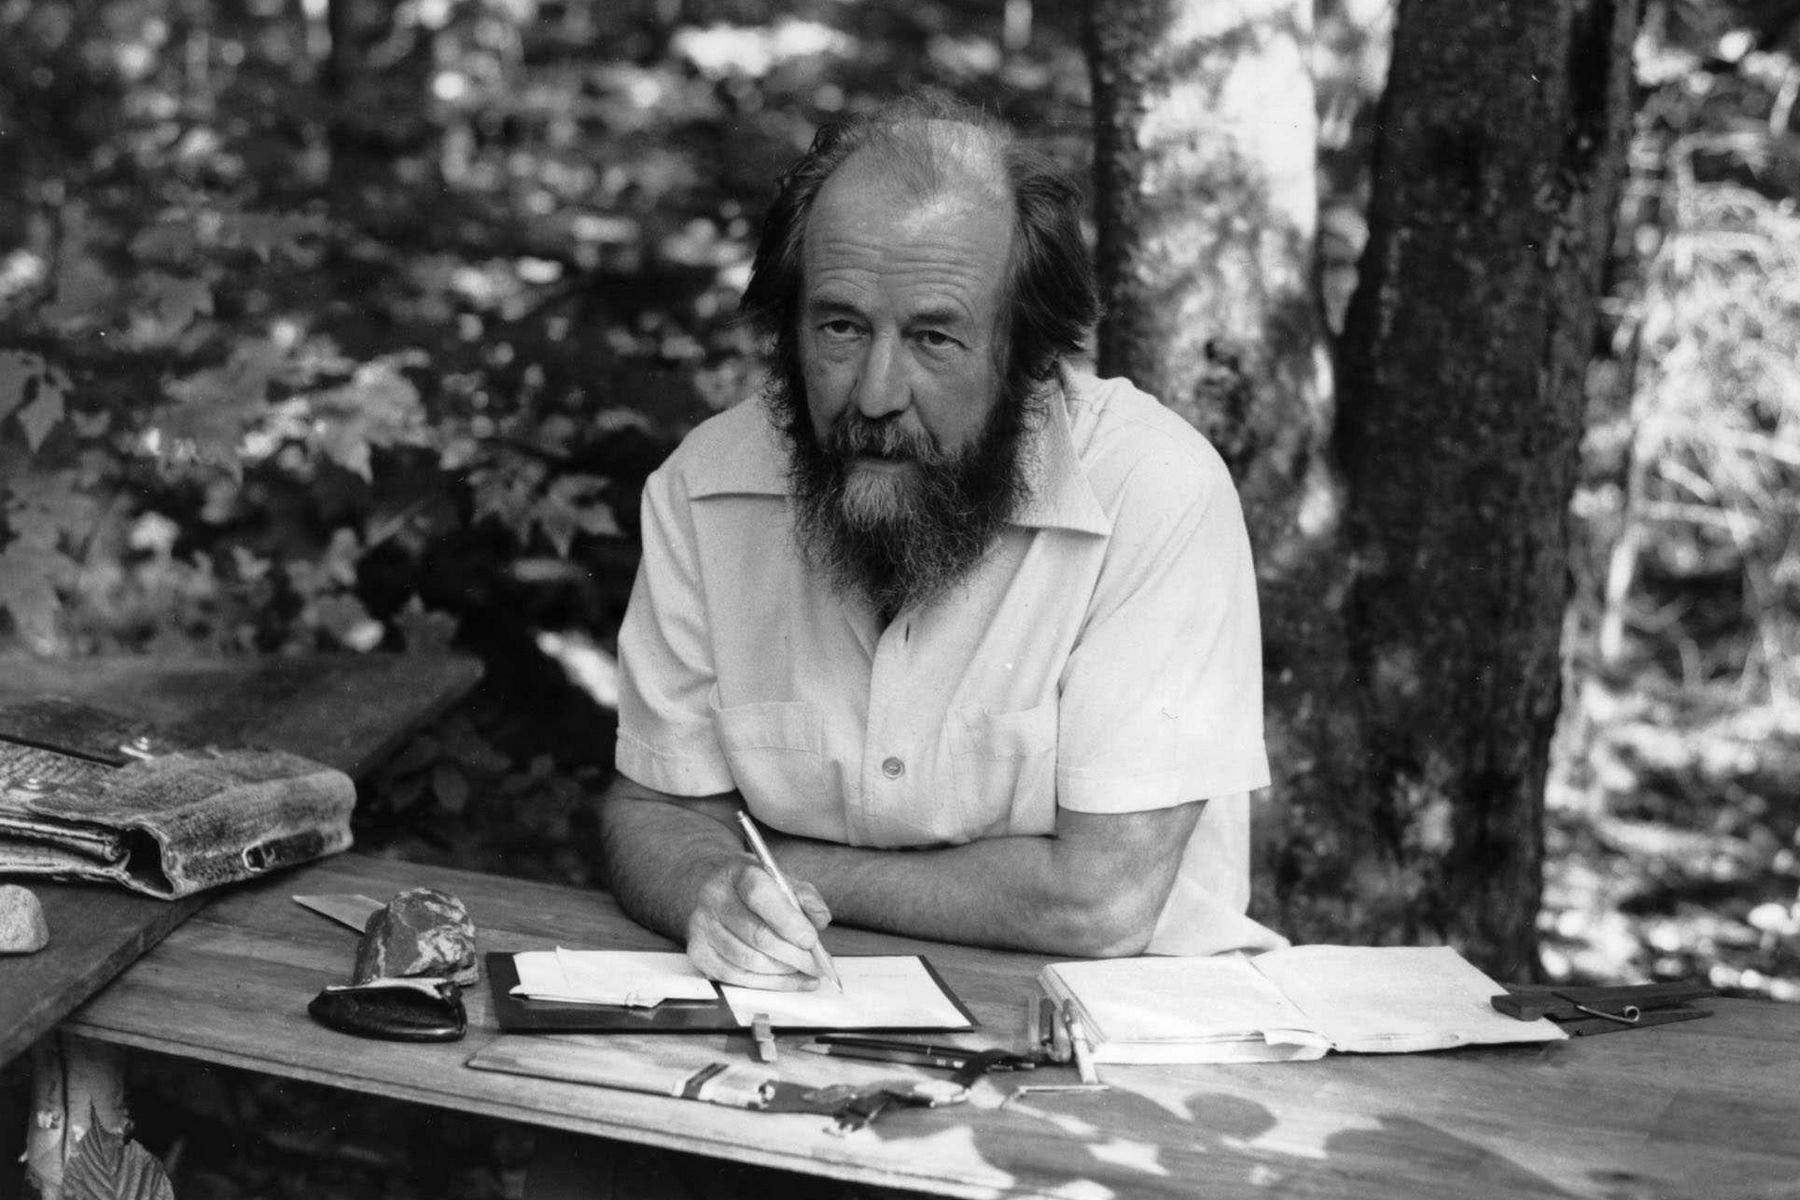 Culture, History, and the Exchange of Virtues. Reflections on Solzhenitsyn’s Harvard Address, June 8, 1978